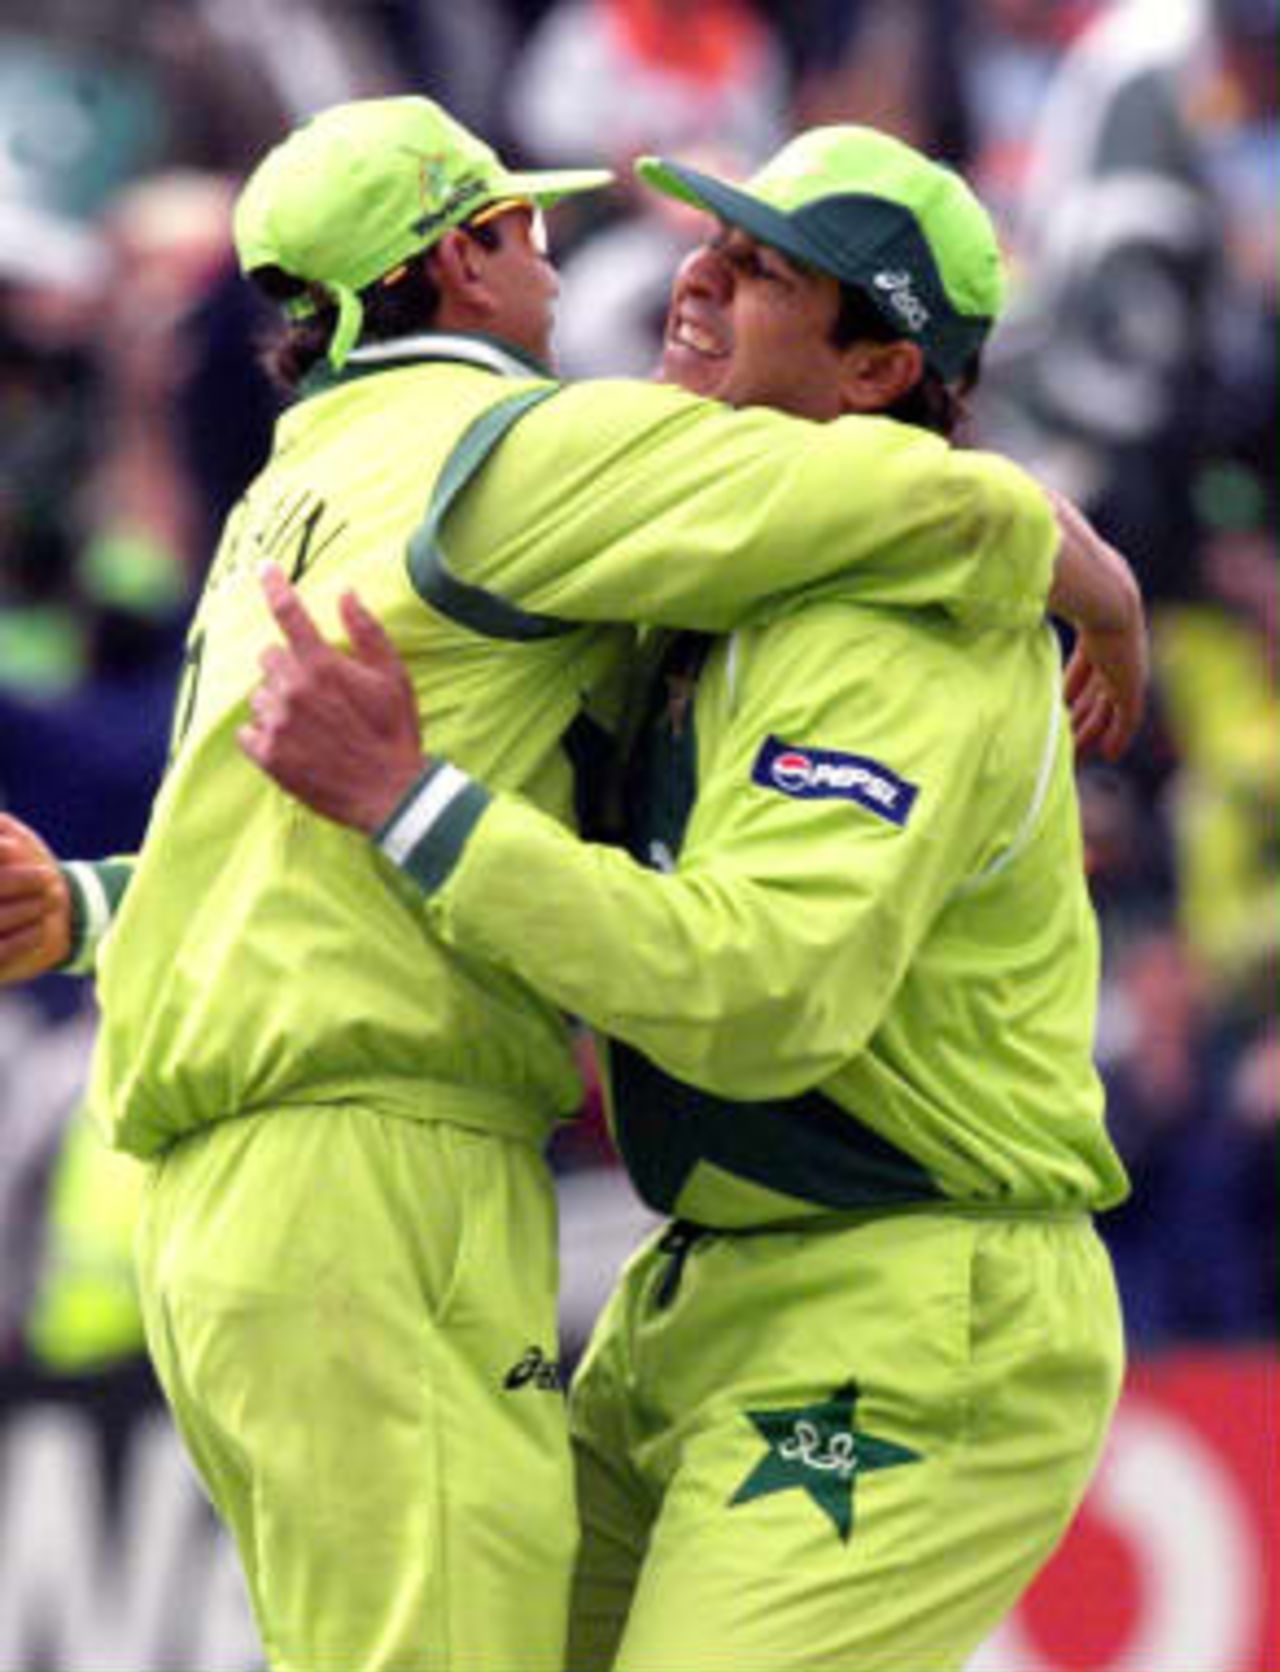 Pakistan players celebrate after Sachin Tendulkar of India was caught out at Old Trafford 08 June 1999, during their Super Six match of the Cricket World Cup match in Manchester